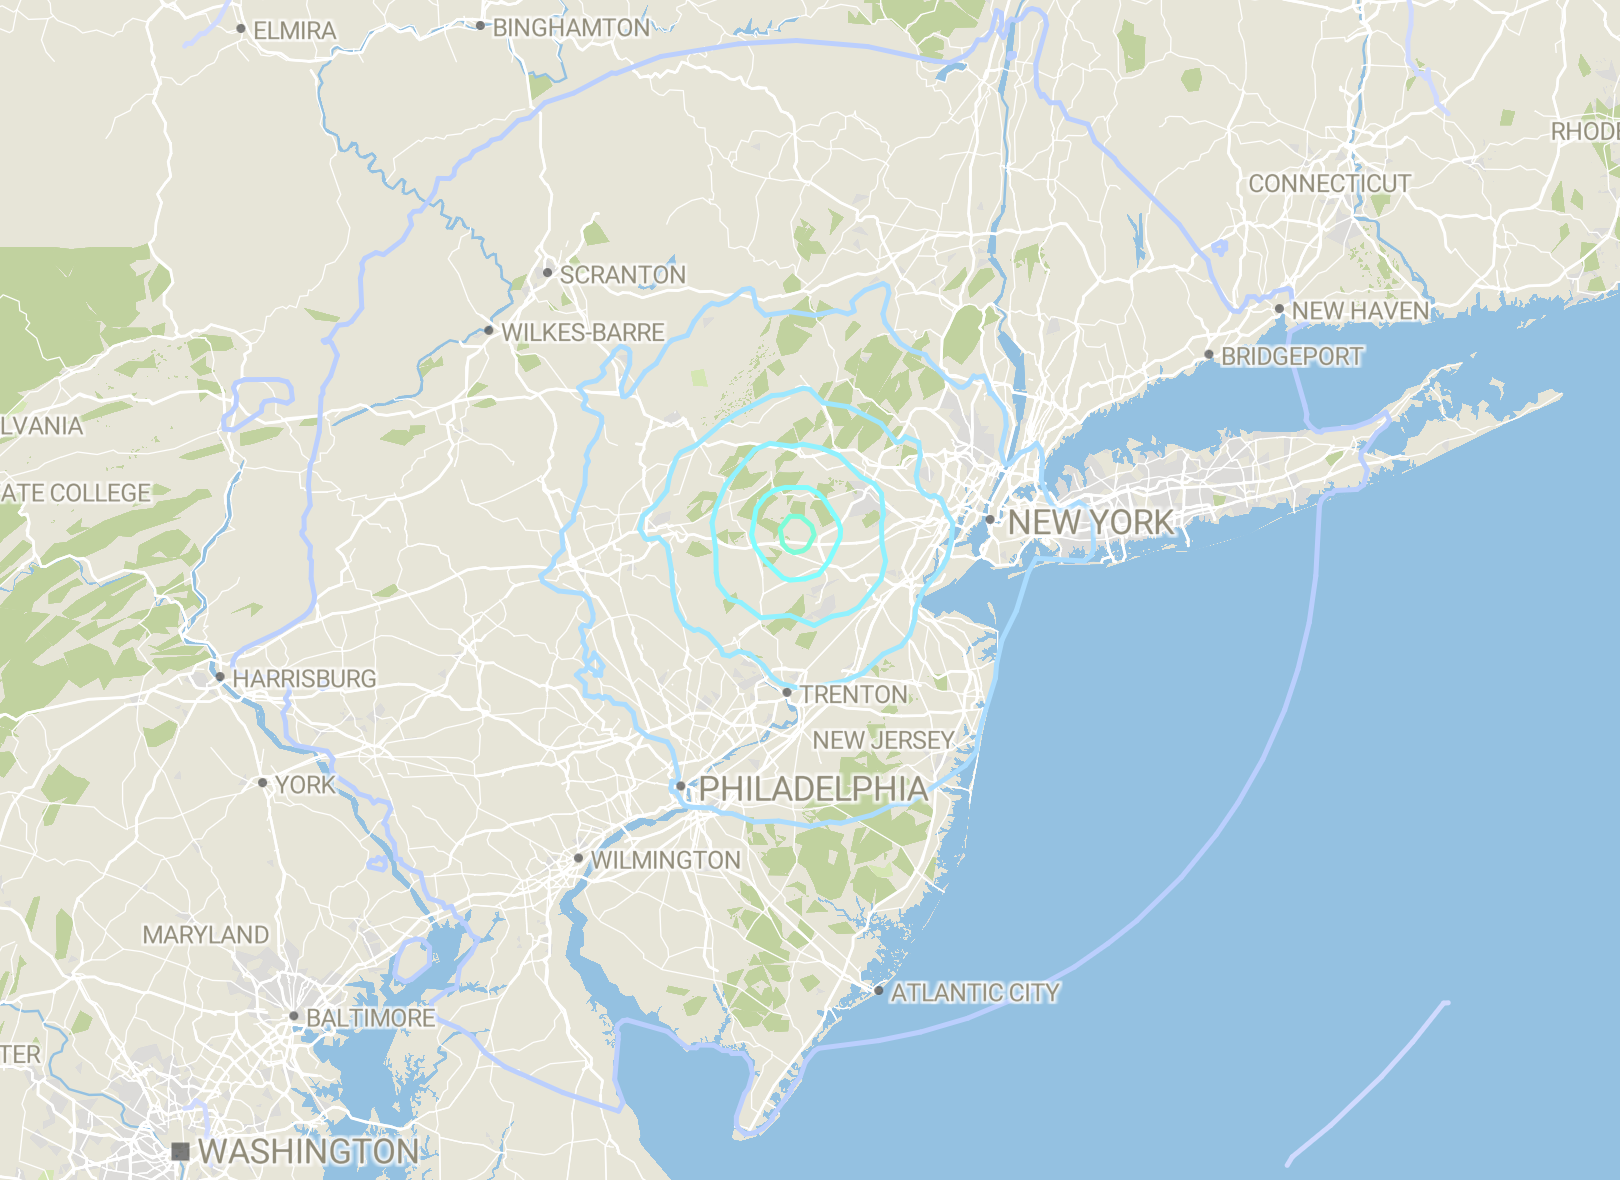 2.6-magnitude aftershock reported in Gladstone, New Jersey days after earthquake, USGS says